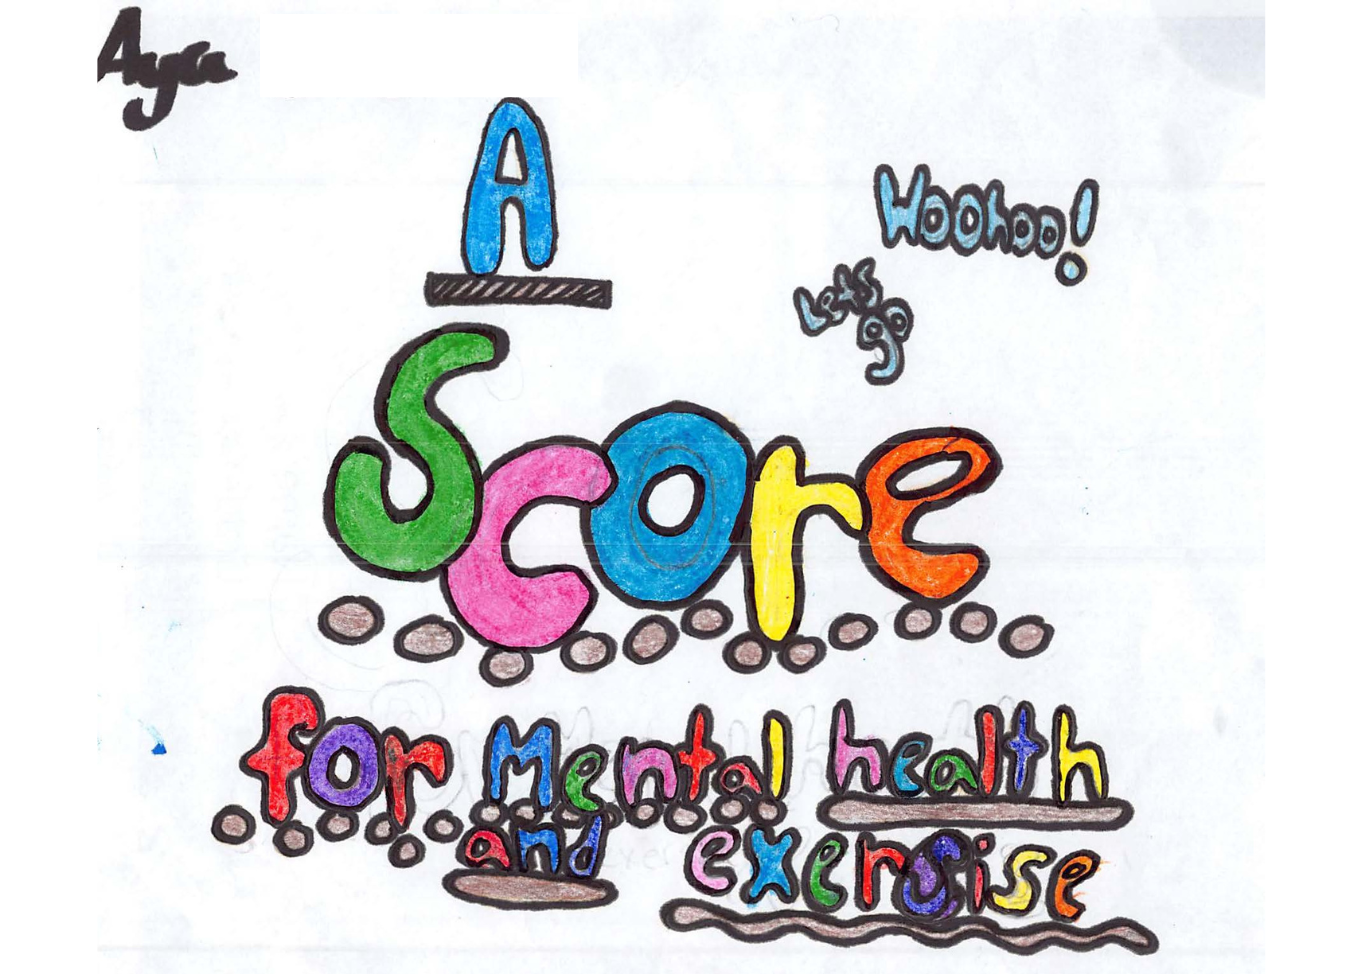 Pencil crayon drawing for the SCORE! logo contest. Text reads: A score for mental health and exercise.